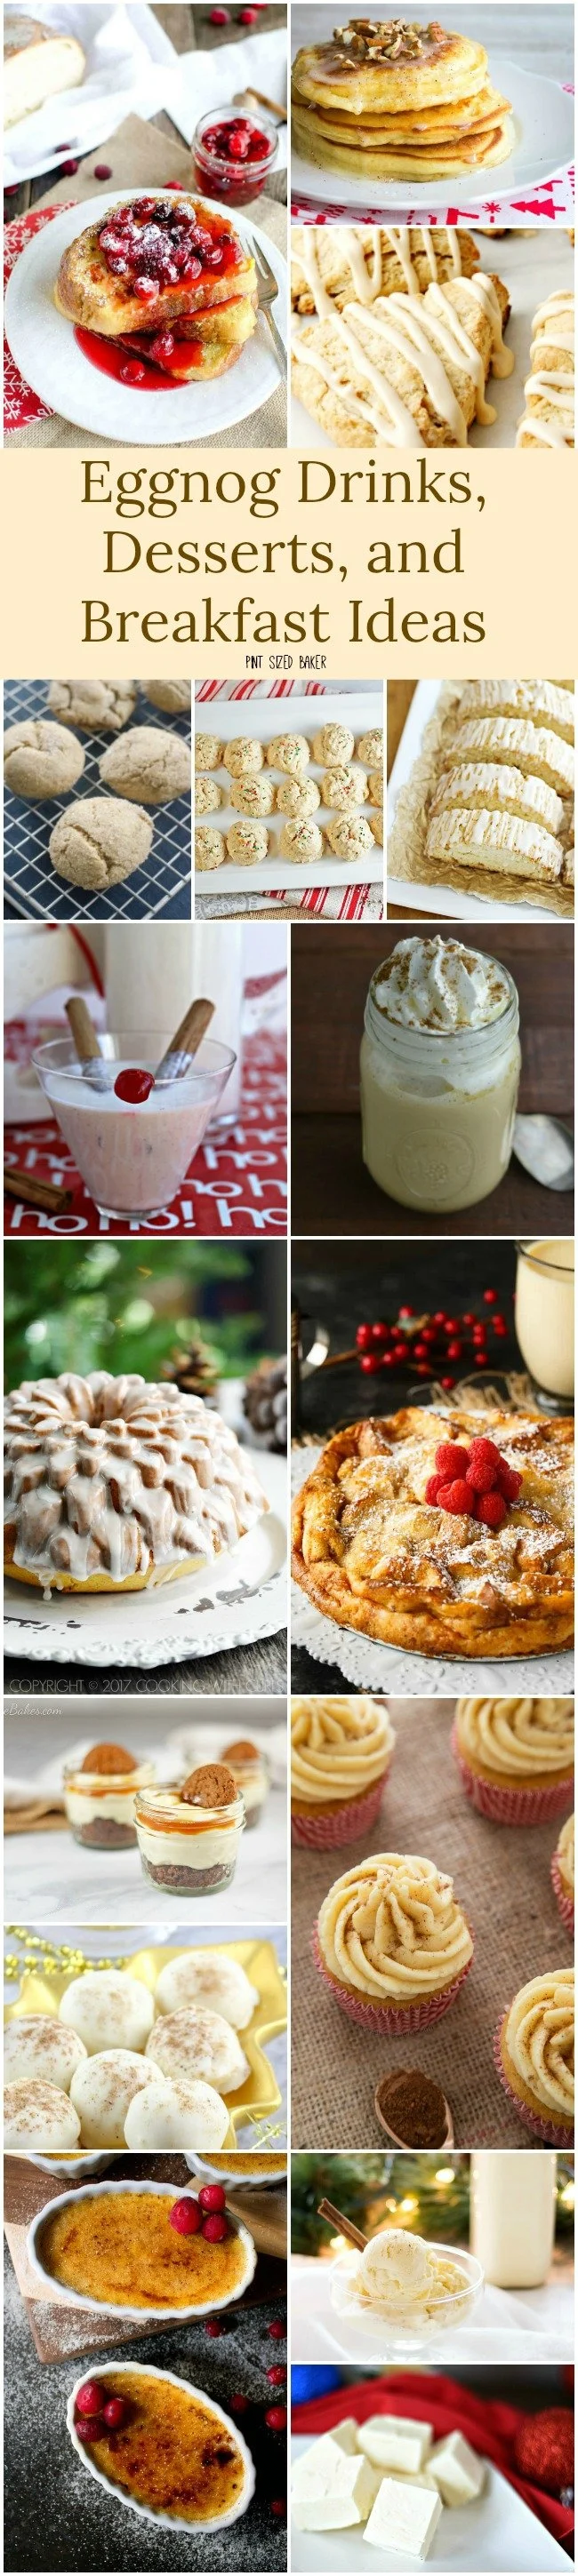 Do you make your own eggnog Love it or hate it, here's 16 Eggnog Drinks, Desserts, and Breakfast Recipe Ideas that are perfect for the holiday season.